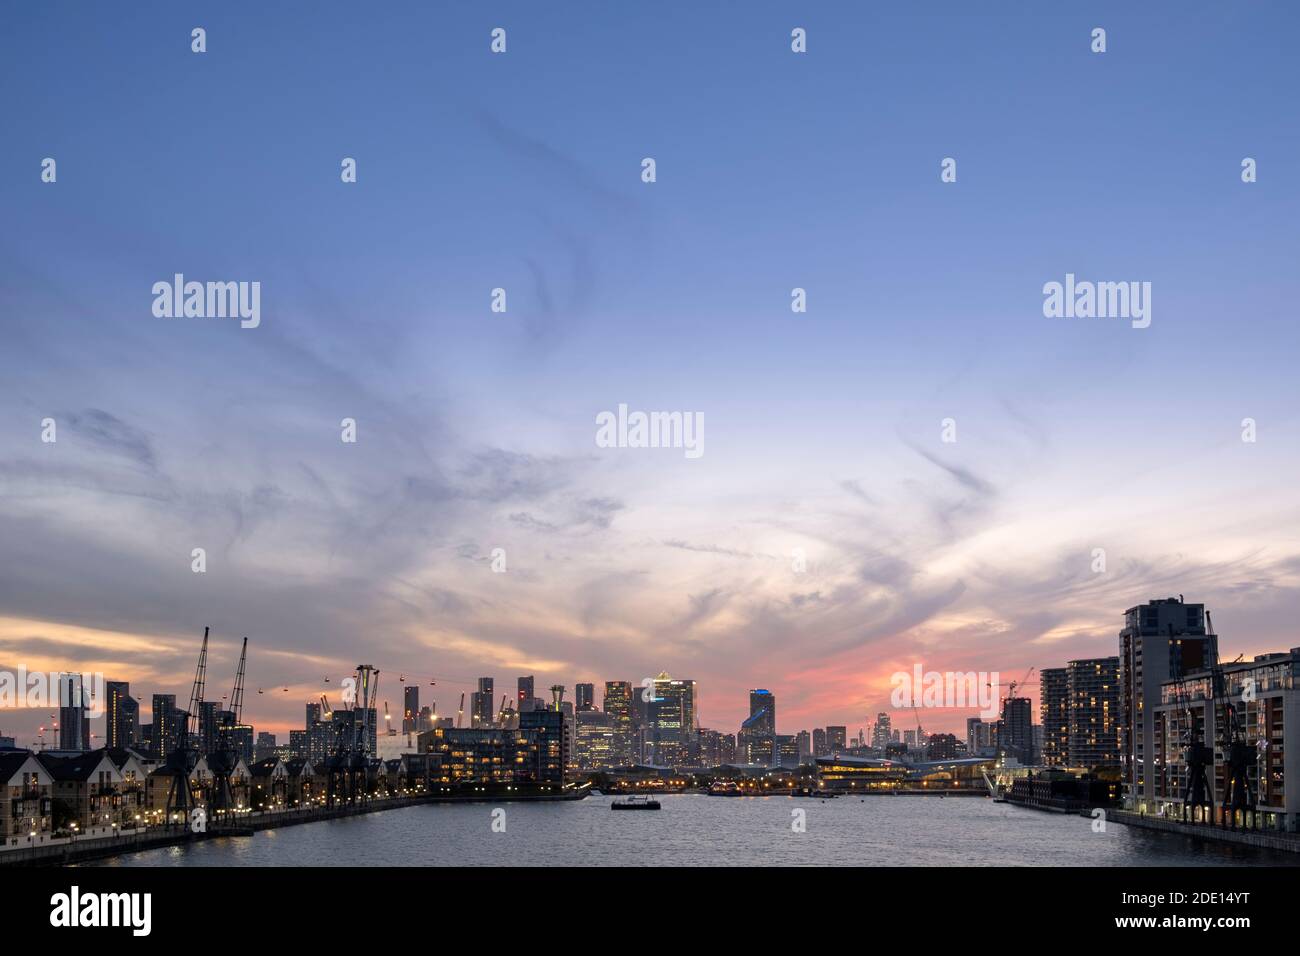 London skyline at dusk with Canary Wharf and the City of London financial districts, the Emirates Cable Car and Victoria Dock, London Stock Photo